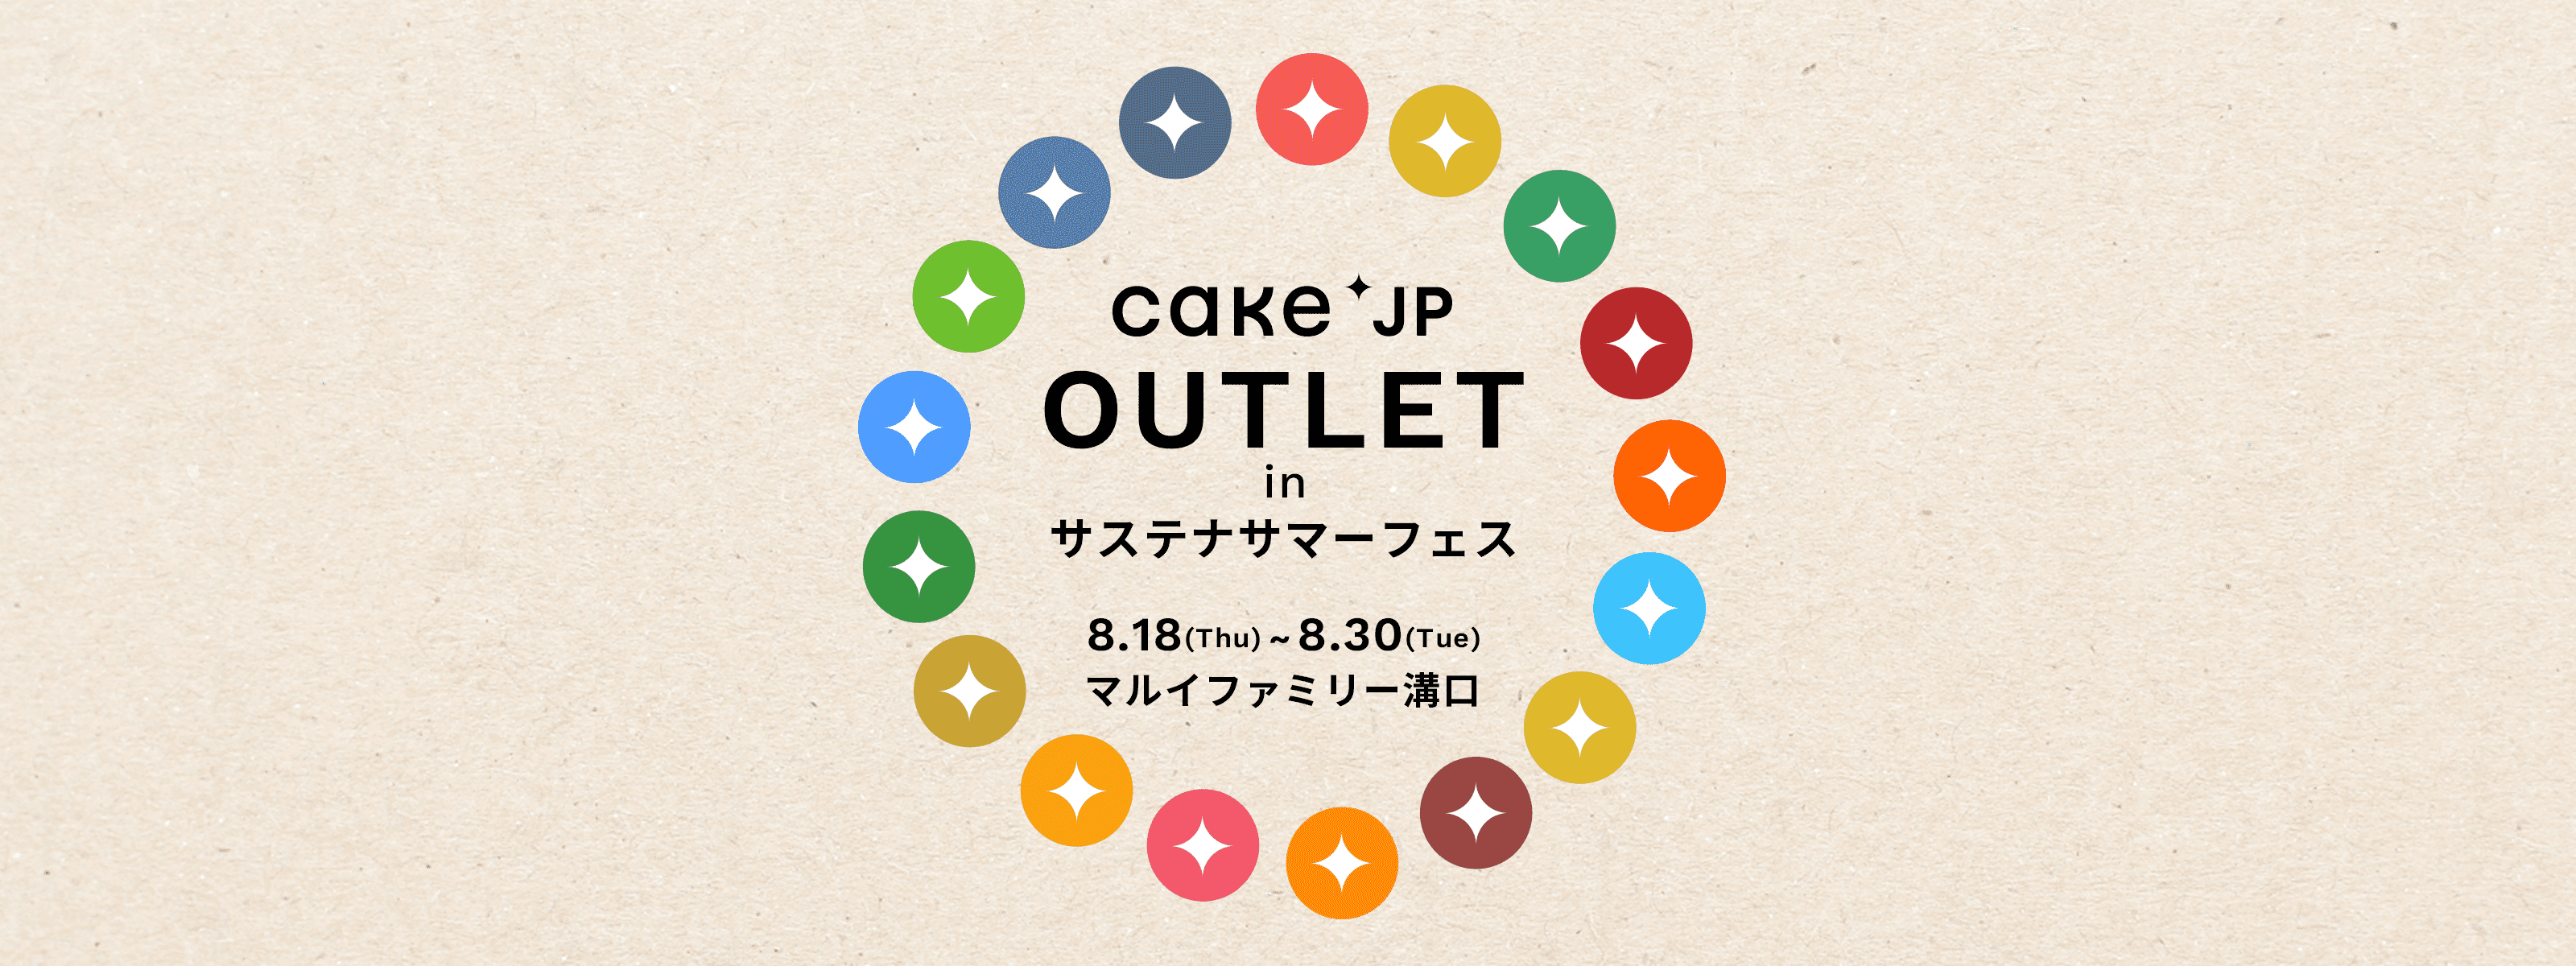 Cake.jp OUTLET in サステナサマーフェス メインビジュアル